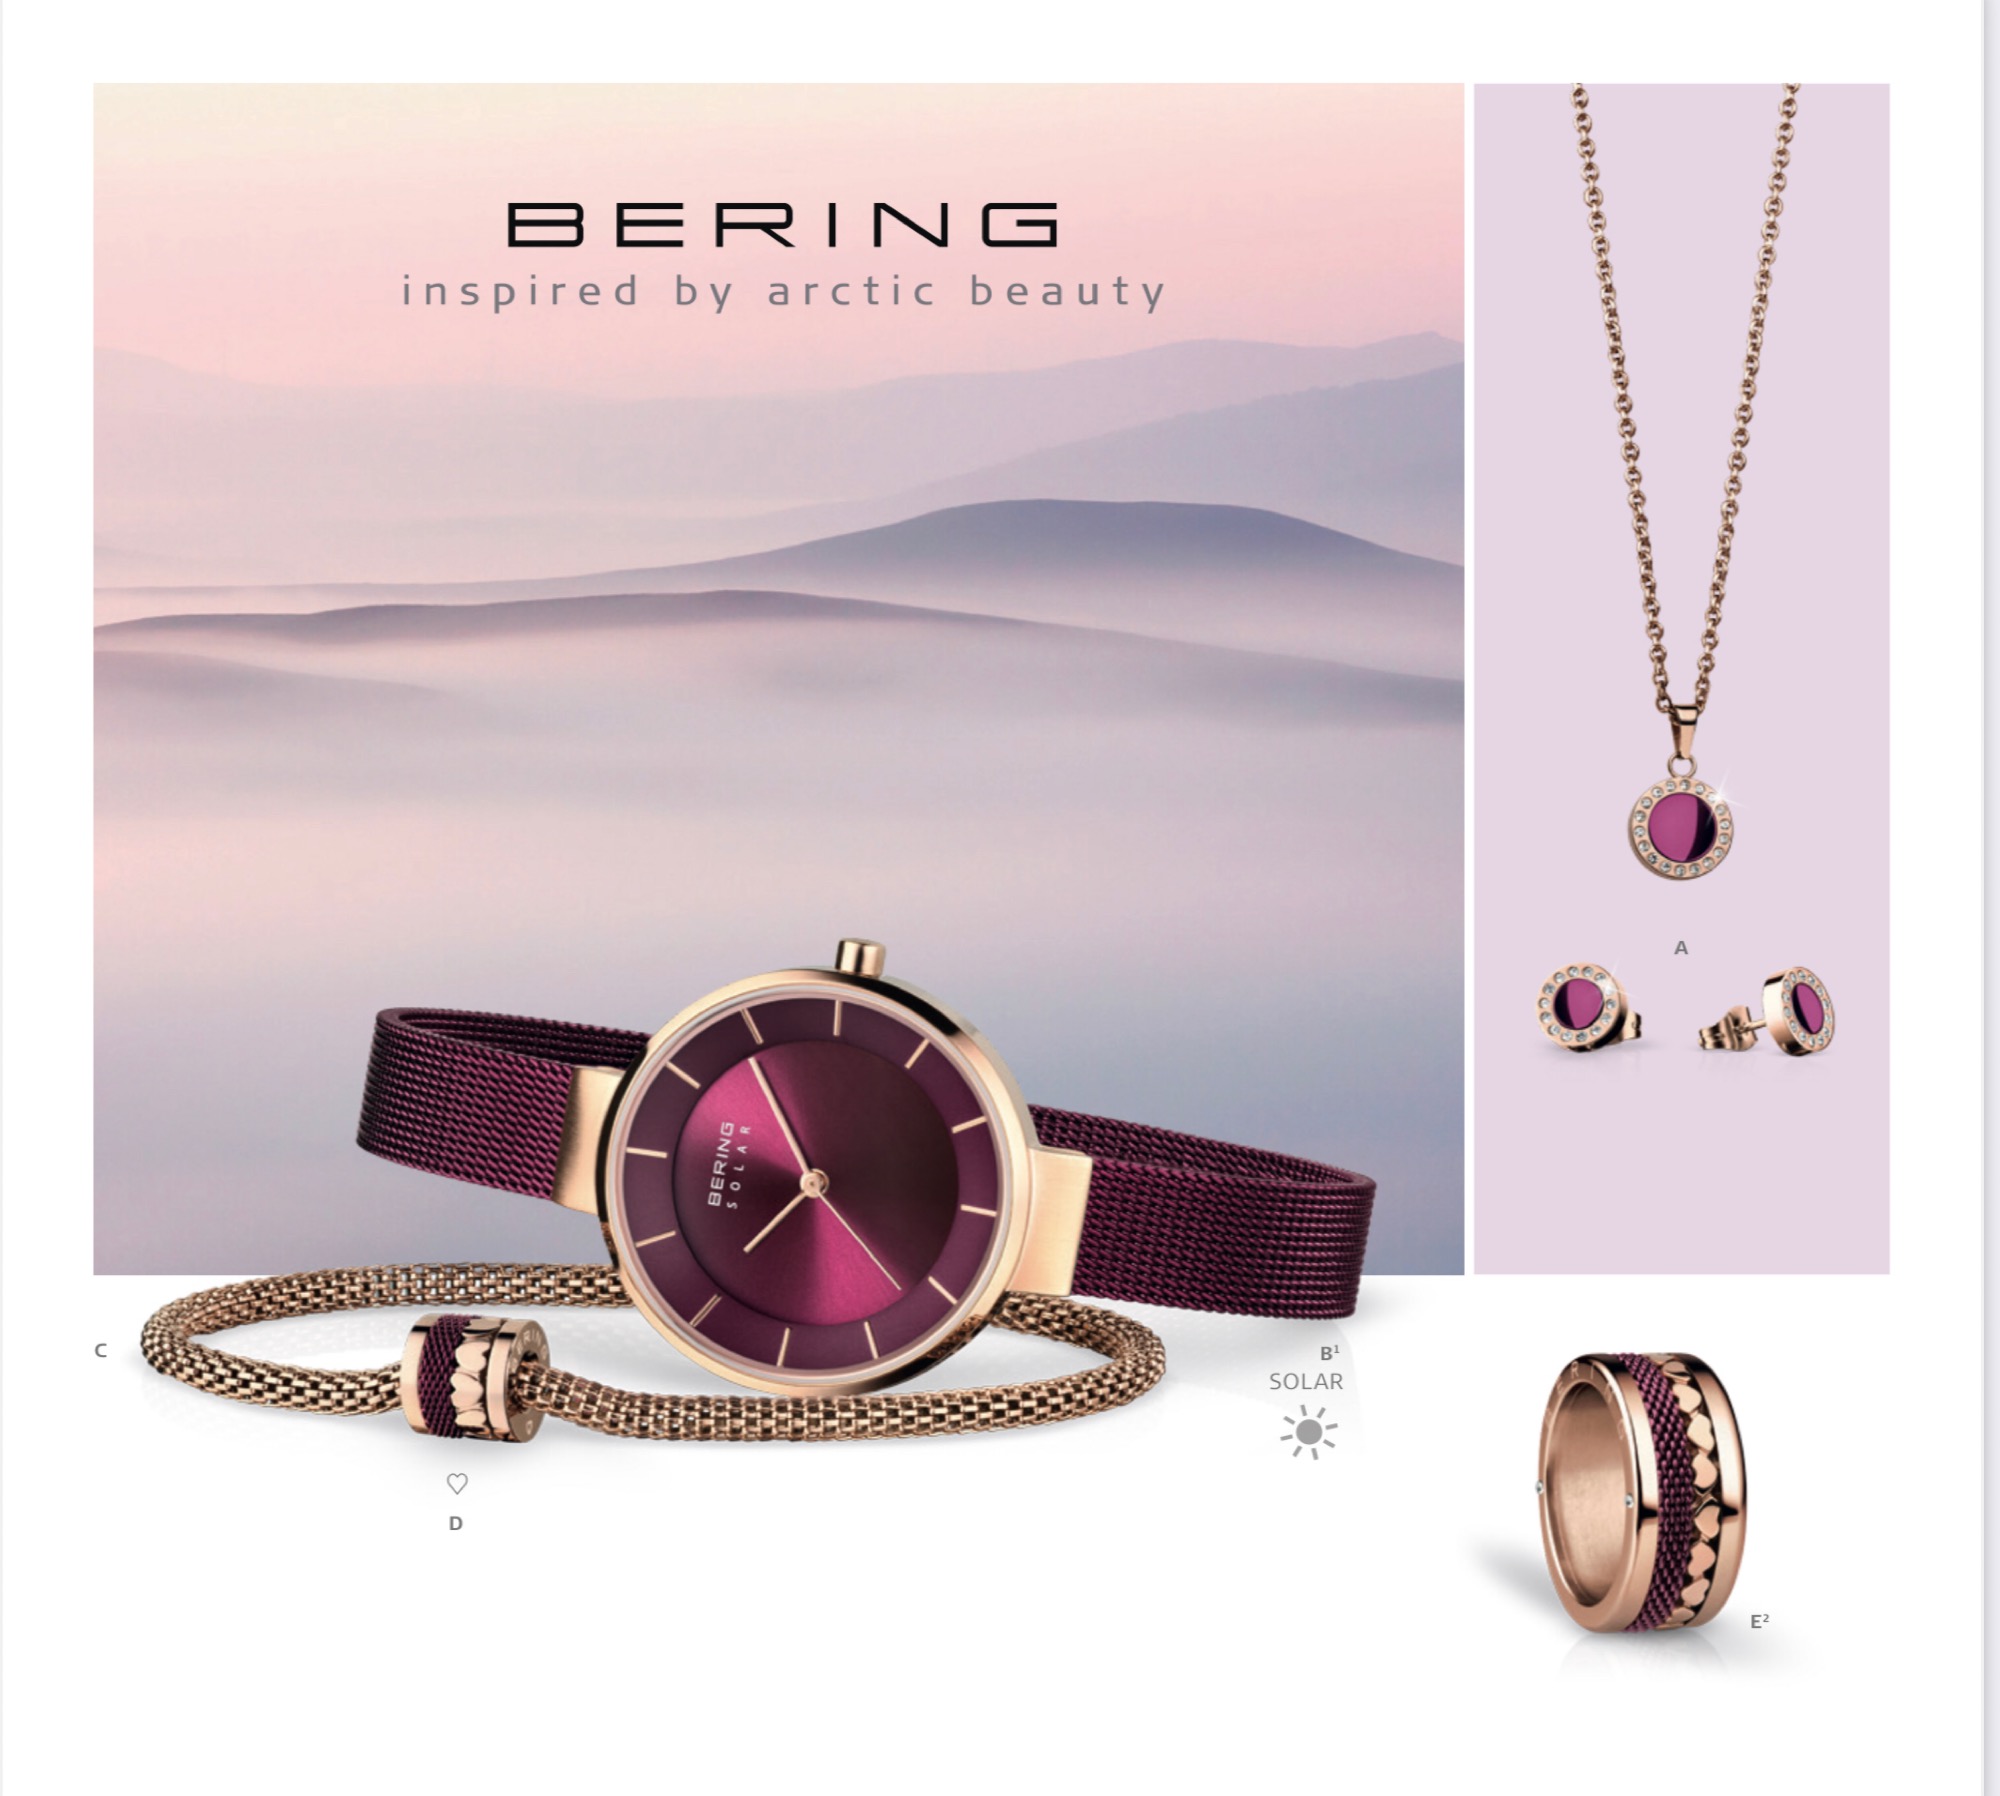 Bering, inspired by arctic beauty!